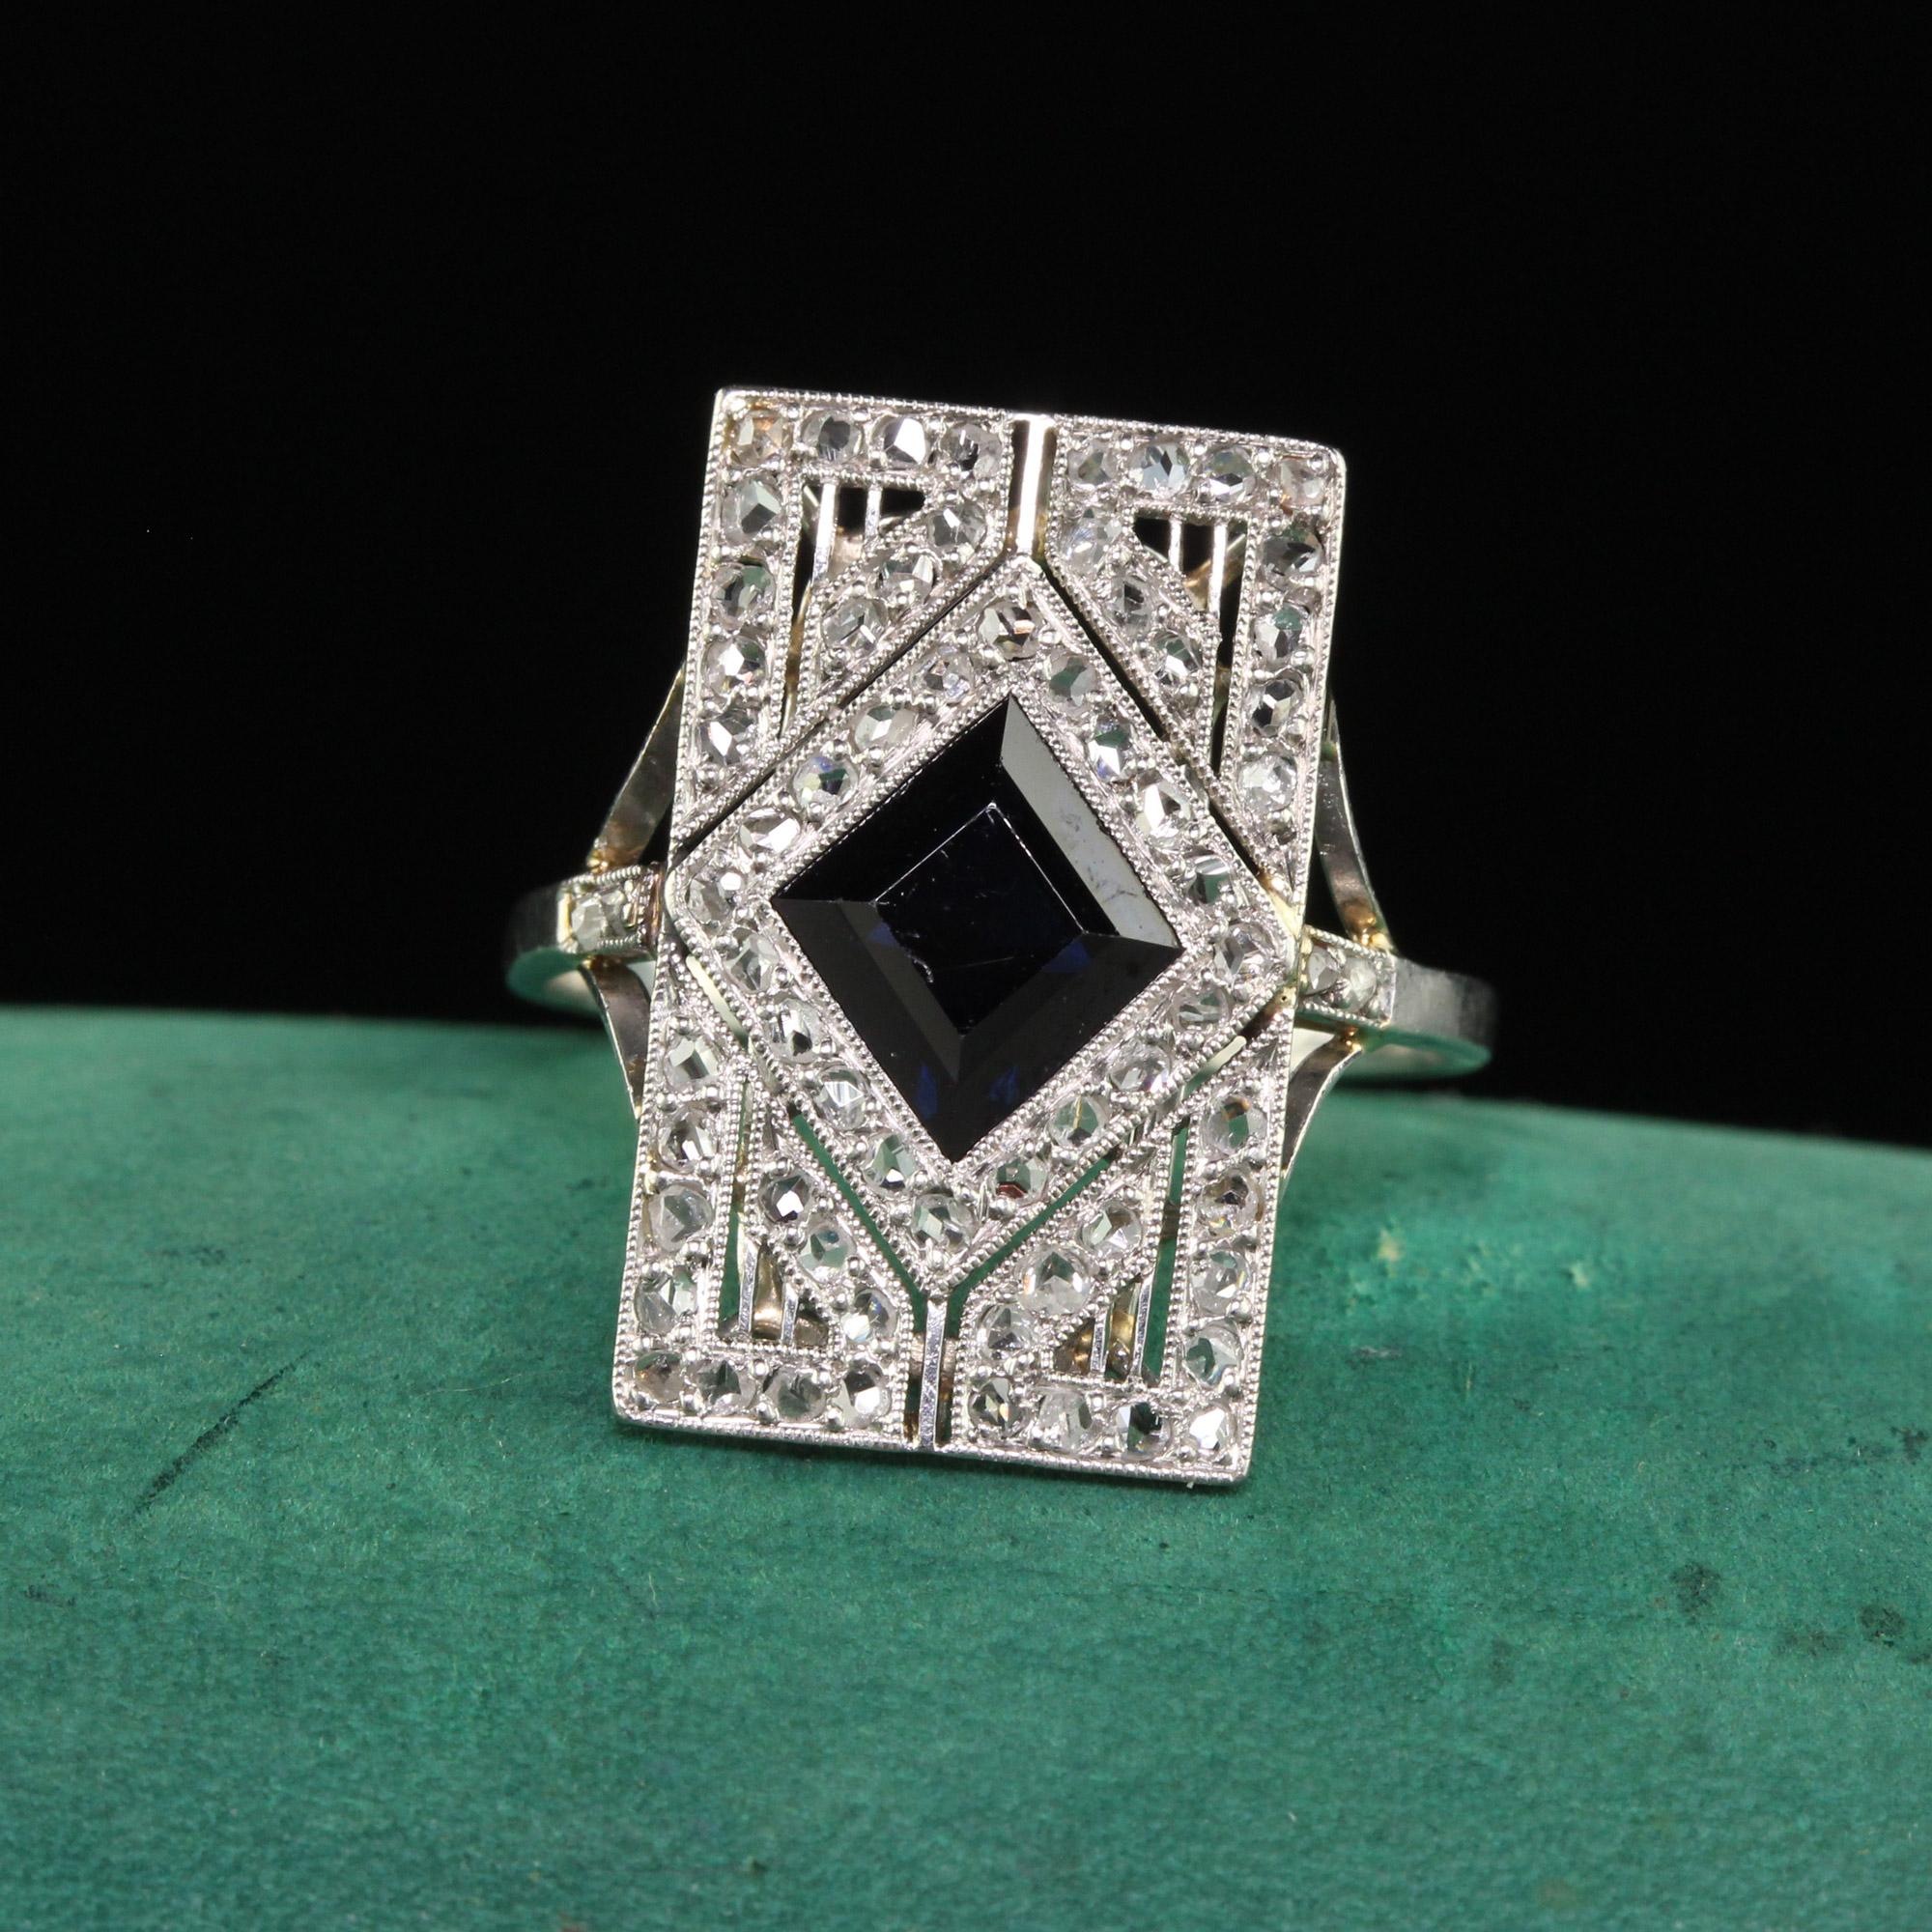 Beautiful Antique Art Deco French Platinum Natural Sapphire and Diamond Shield Ring - GIA. This incredible Art Deco French shield ring is crafted in platinum. The center holds a natural blue sapphire that has a GIA report. The sapphire is a darker